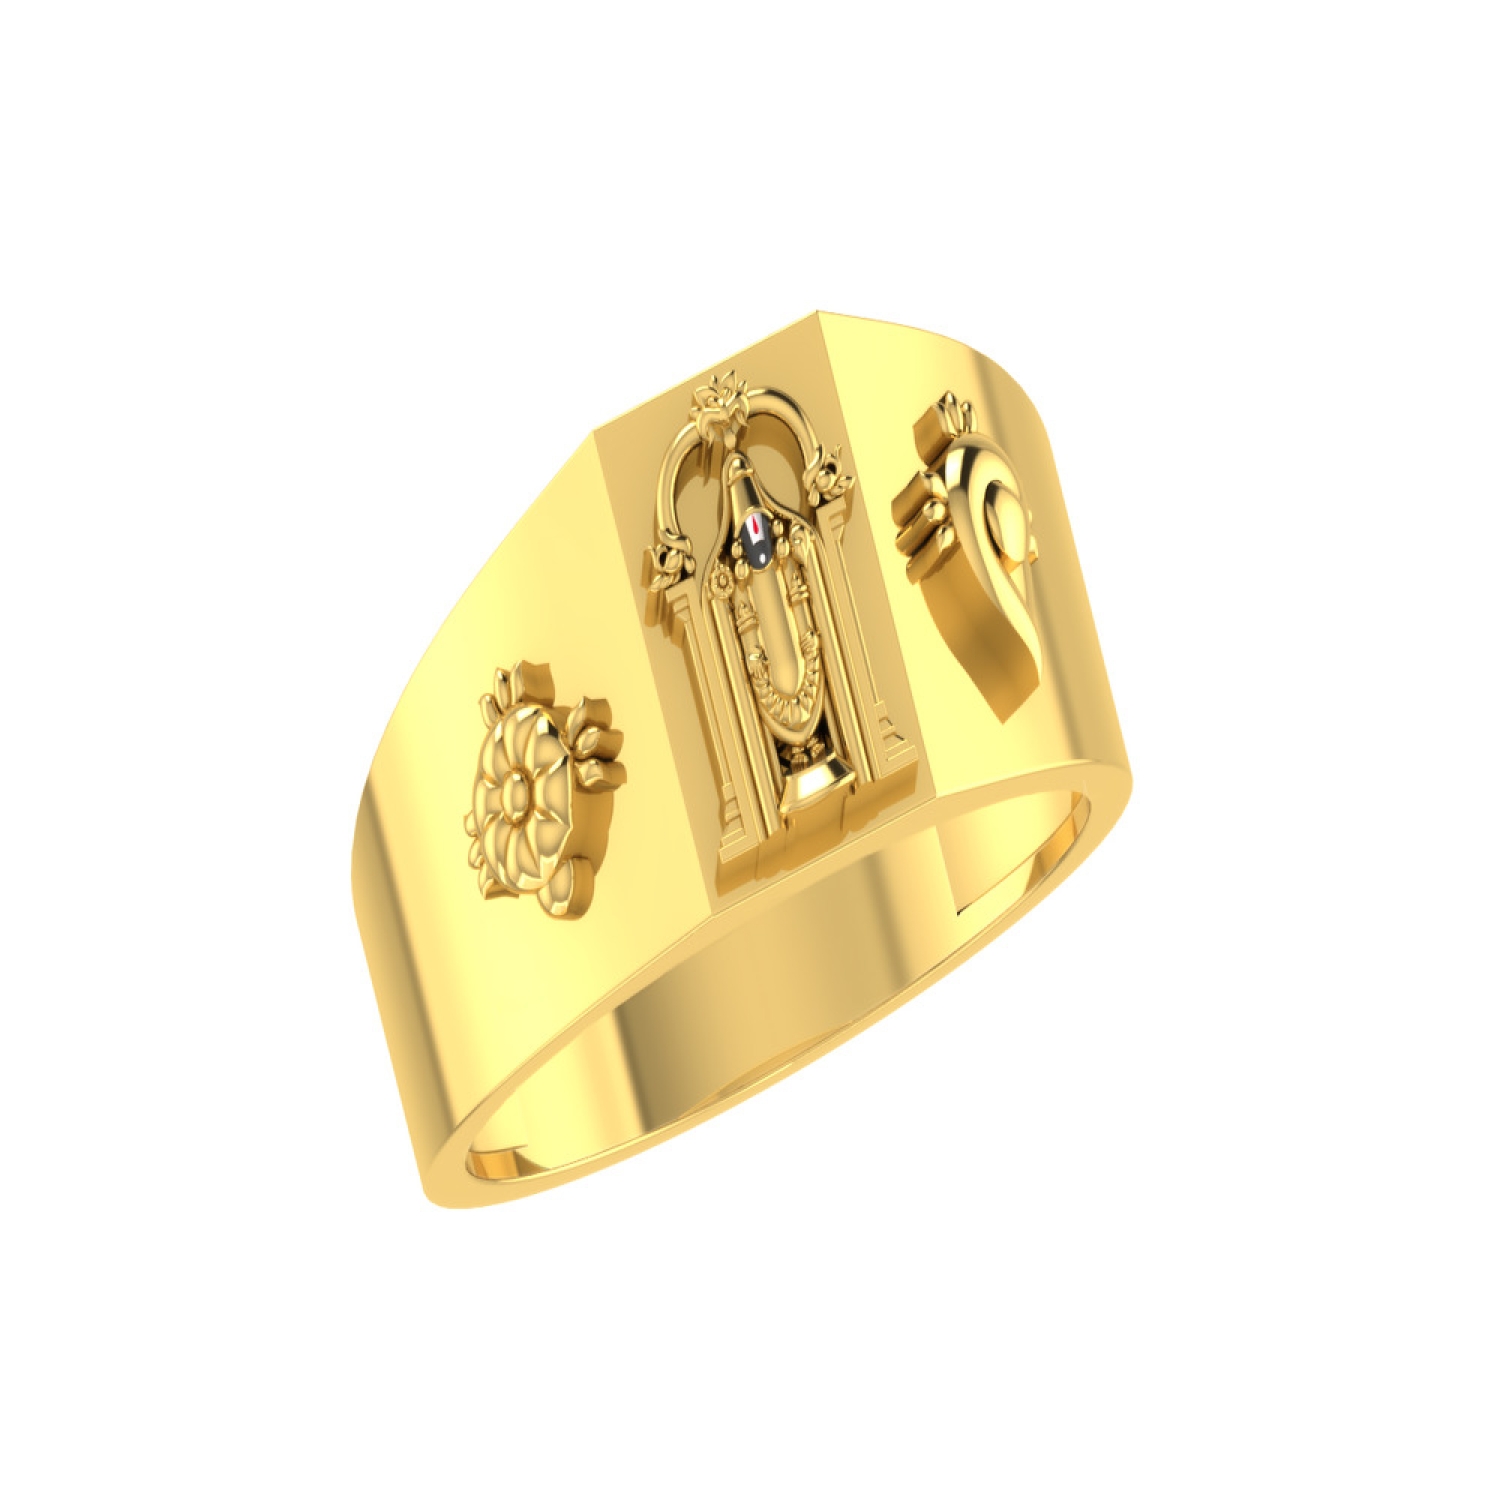 Shop 22k Gold Rings for Women | Indian Gold Rings | Gold Palace